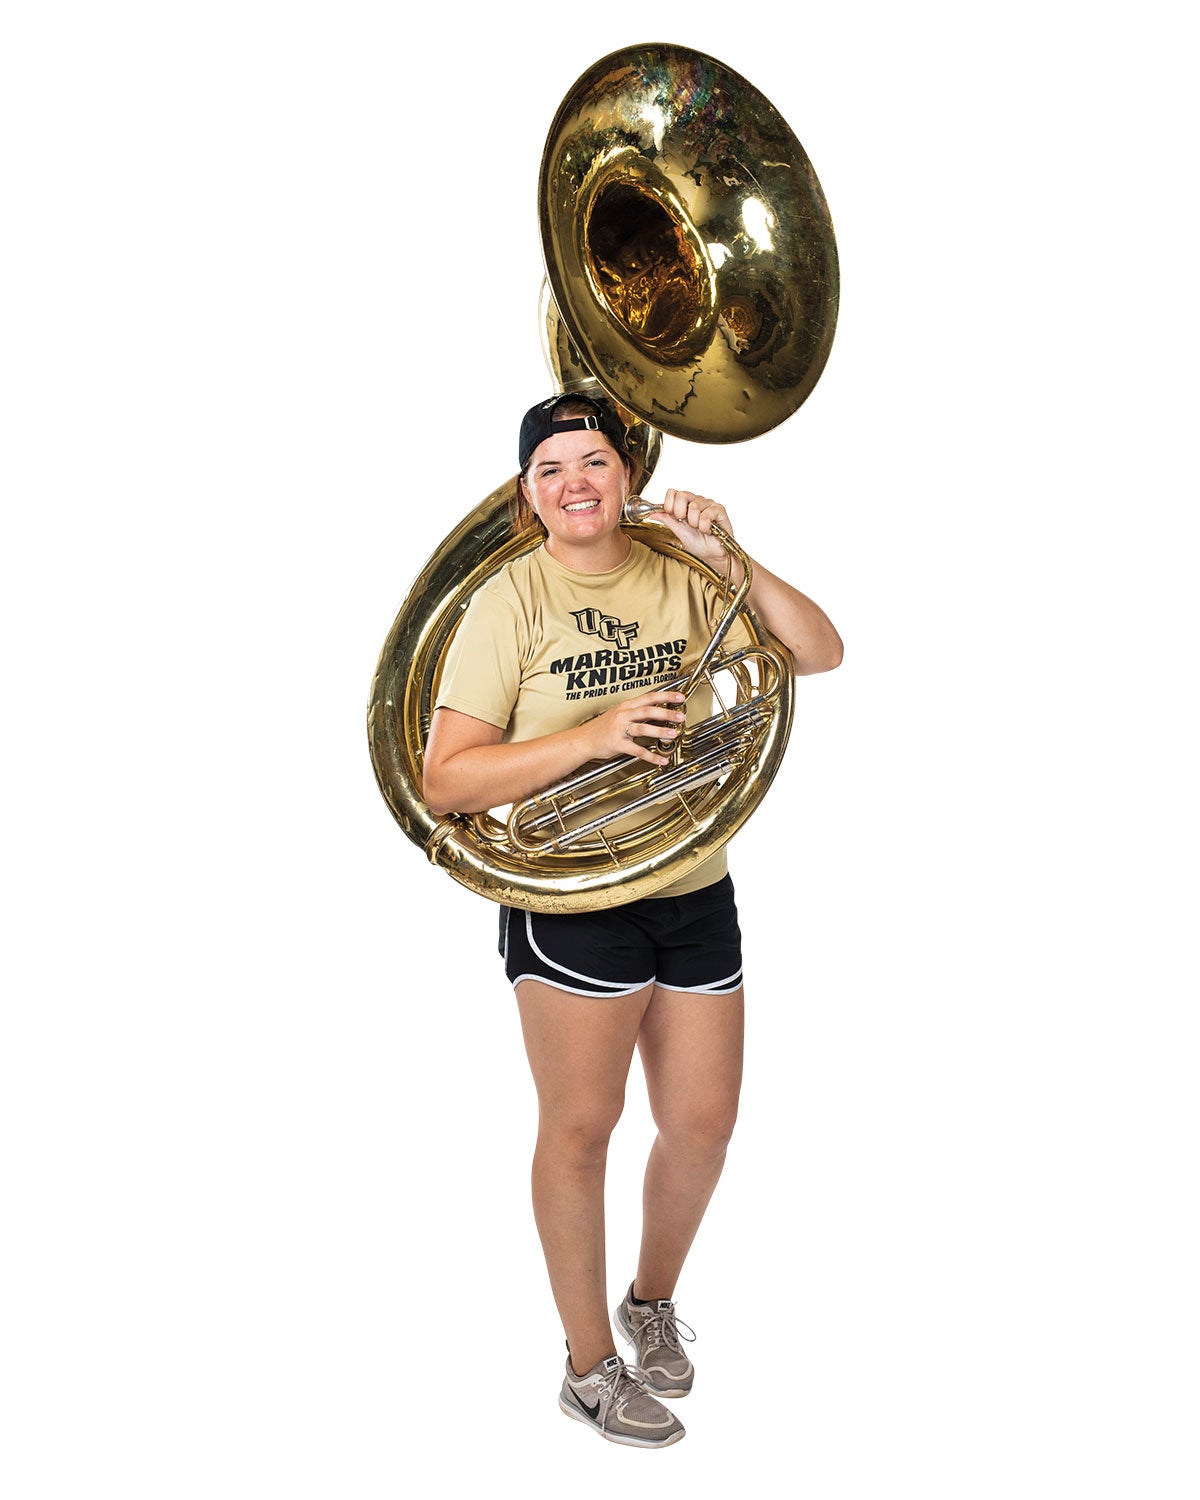 A woman in a yellow shirt and black shorts holds a tuba across her body as she smiles.